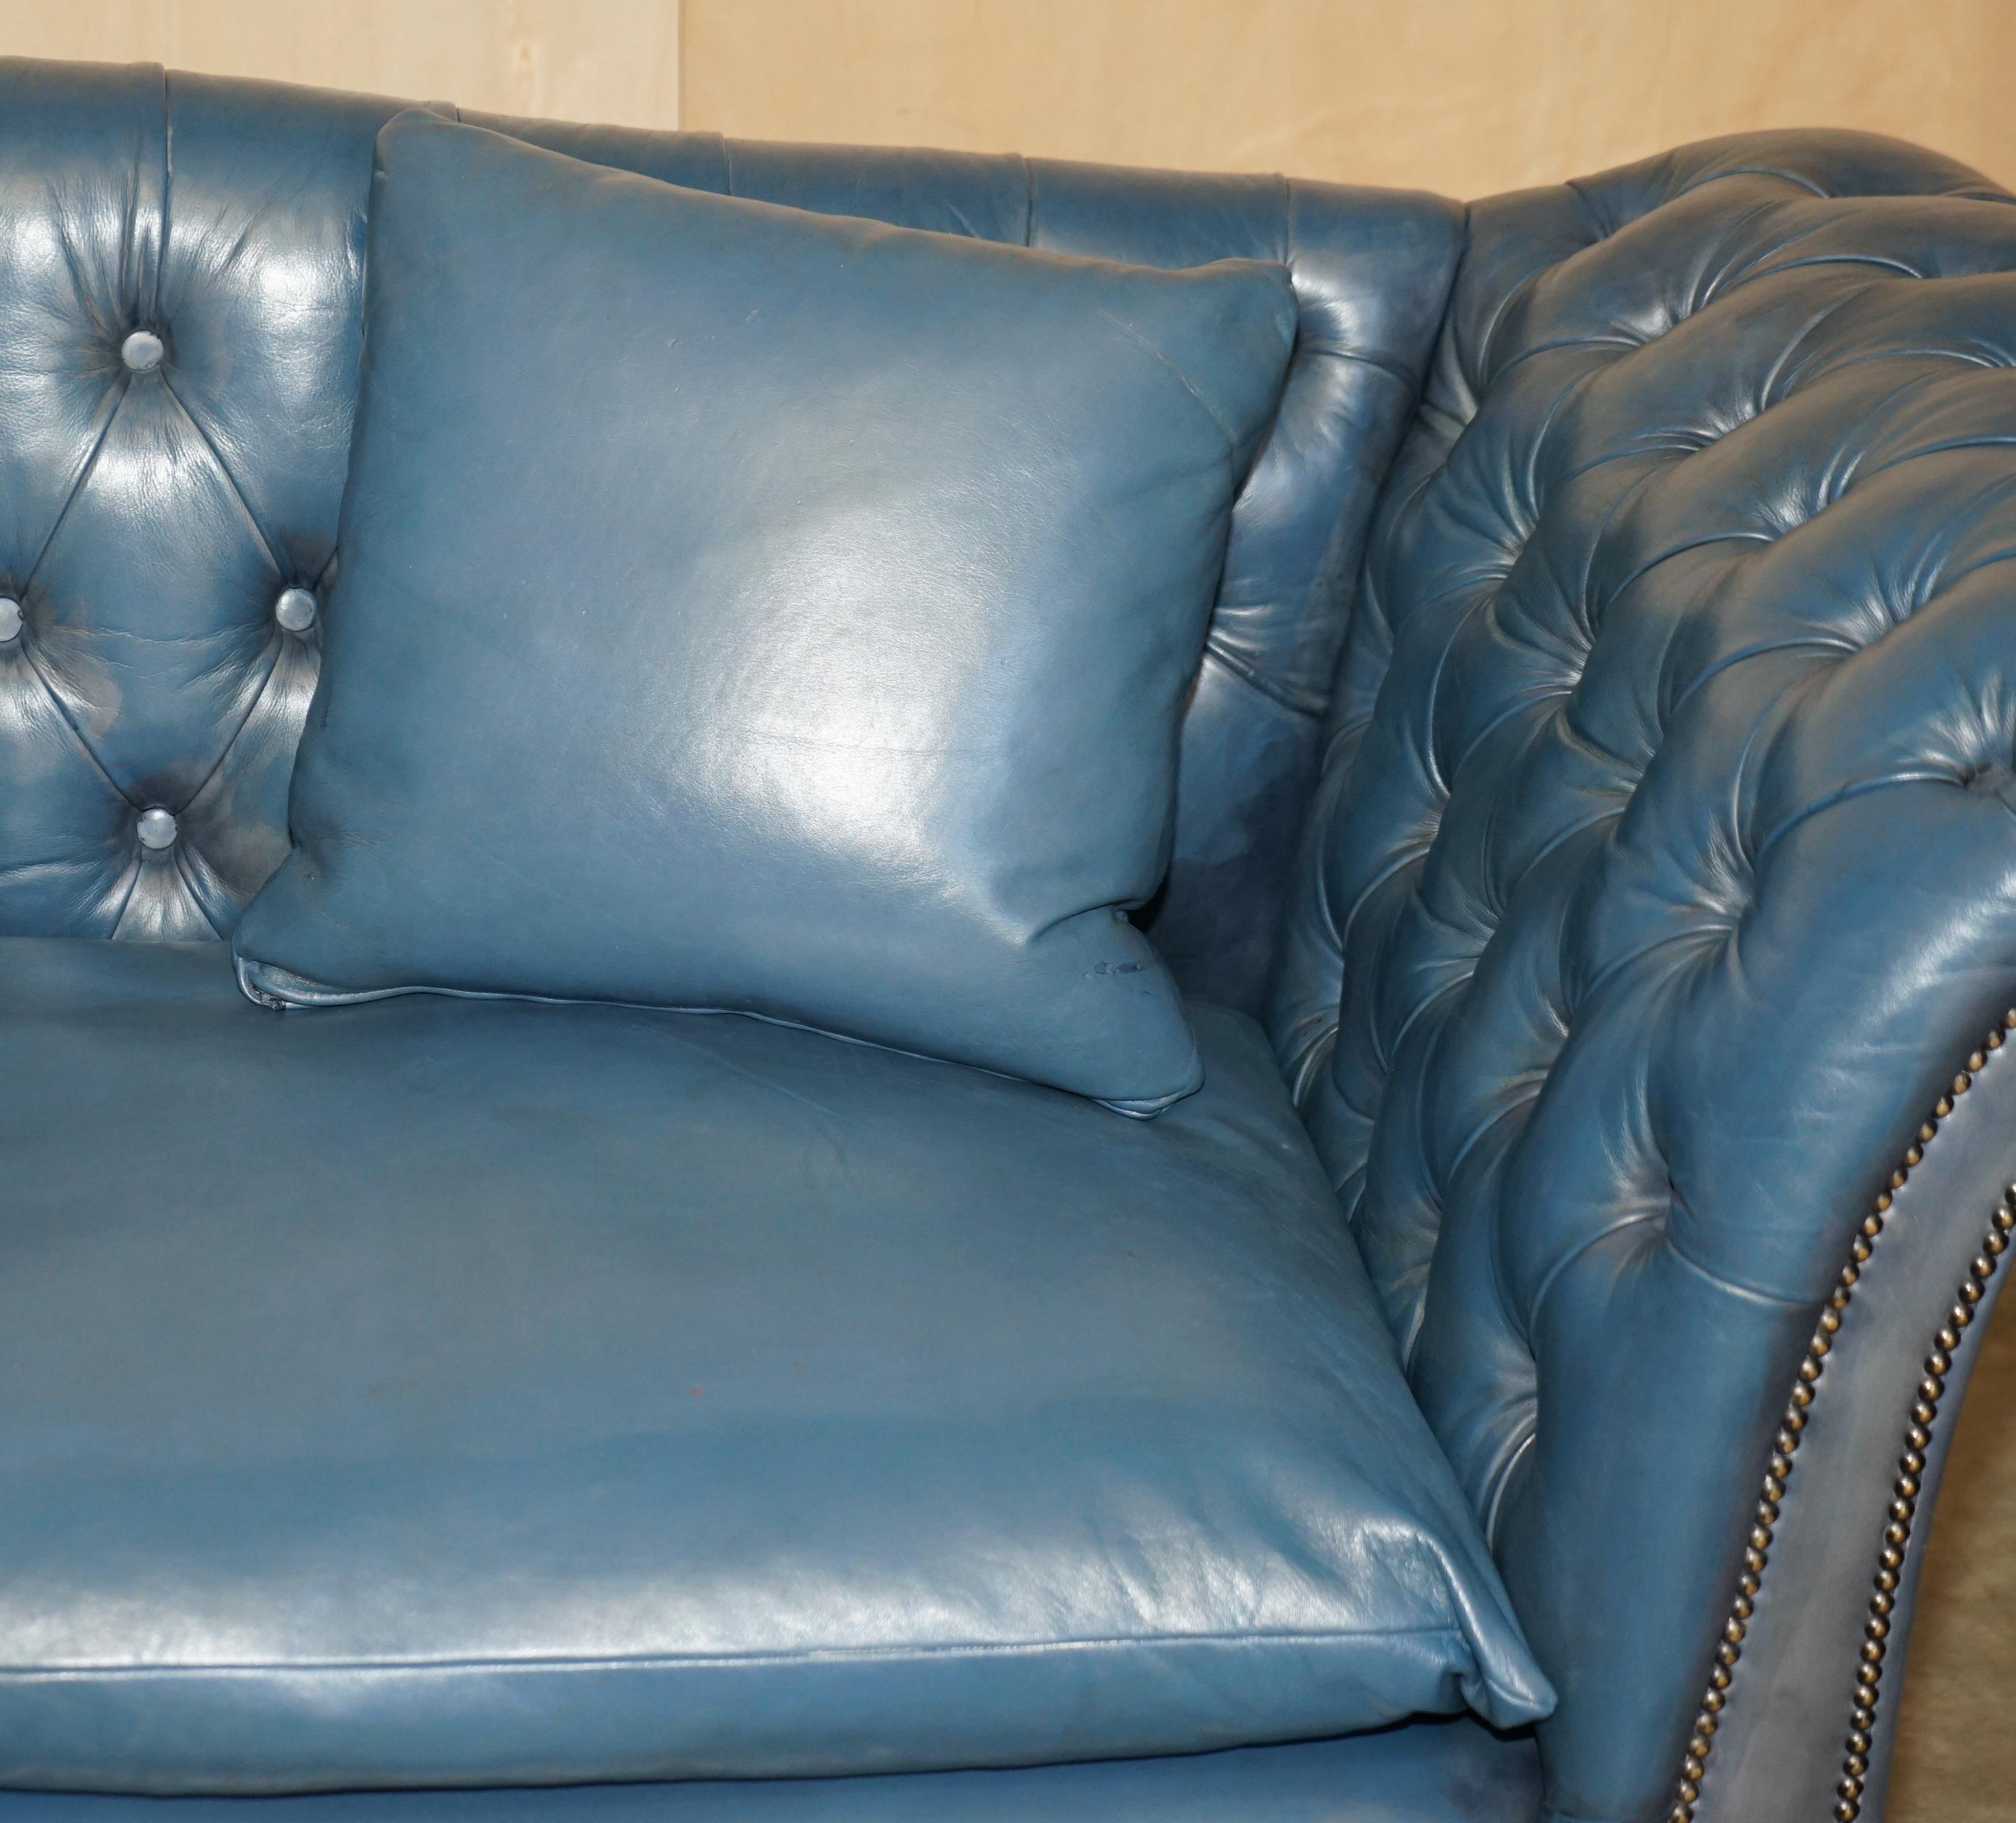 Mid-19th Century RESTORED WILLIAM IV CIRCA 1830 CHESTERFiELD REGENCY BLUE LEATHER HUMP BACK SOFA For Sale